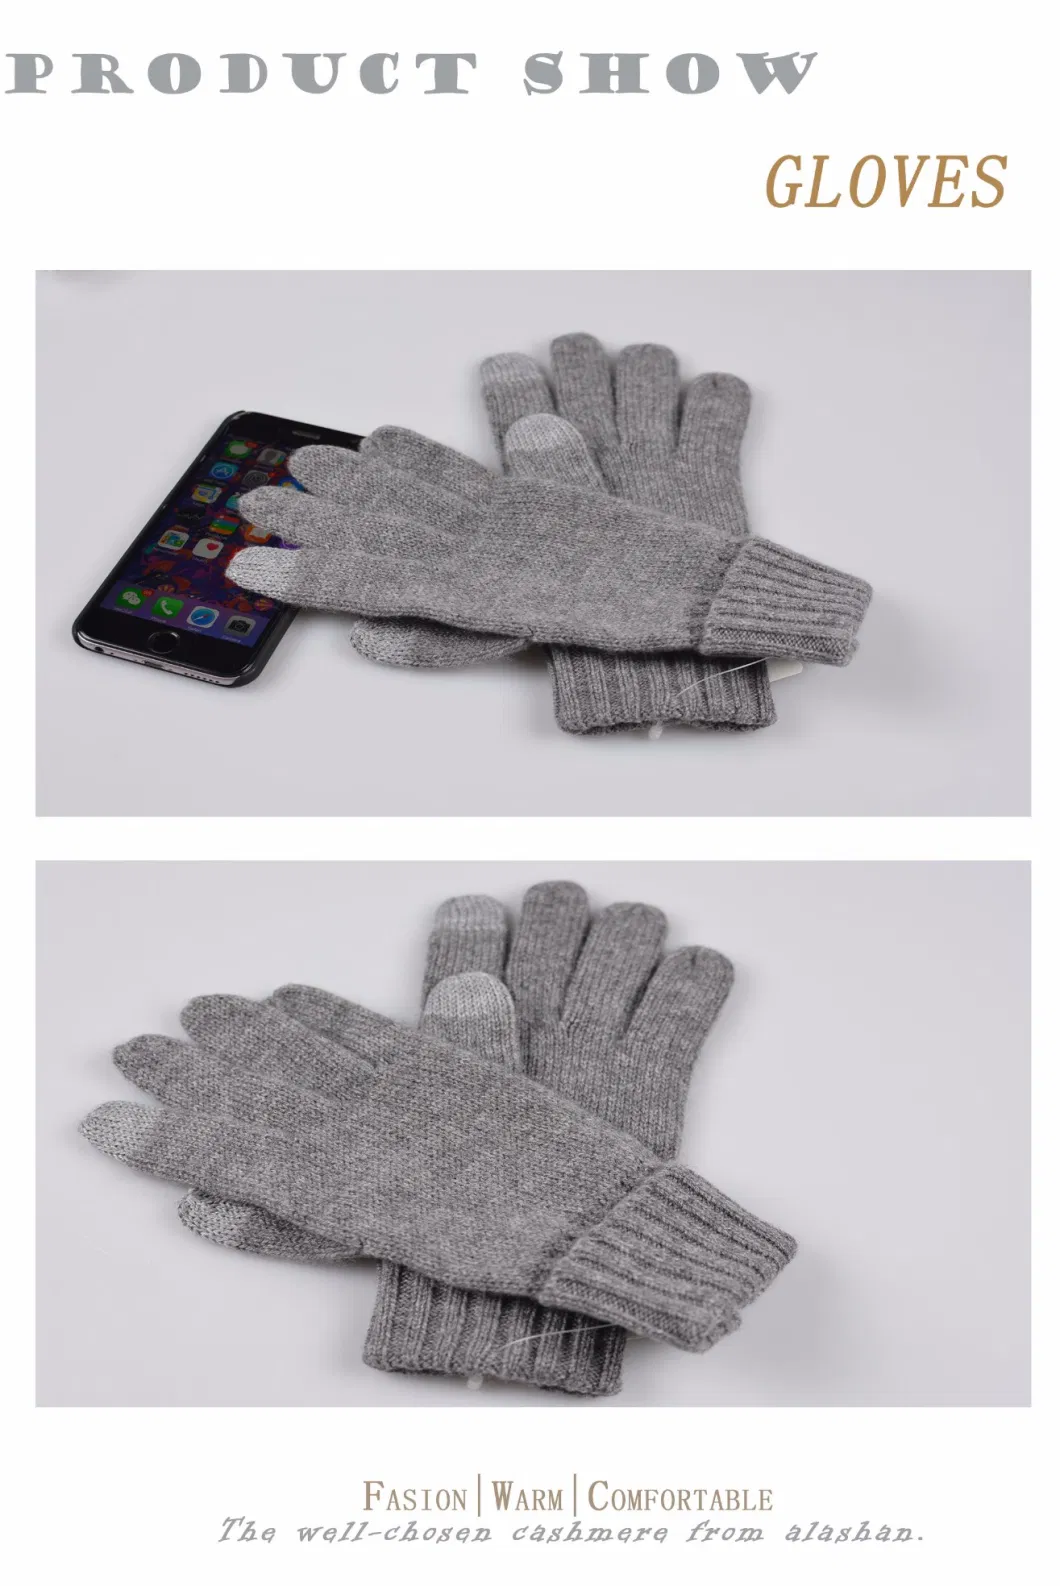 Touch Screen Winter Knitted Cashmere / Wool Gloves Mitten